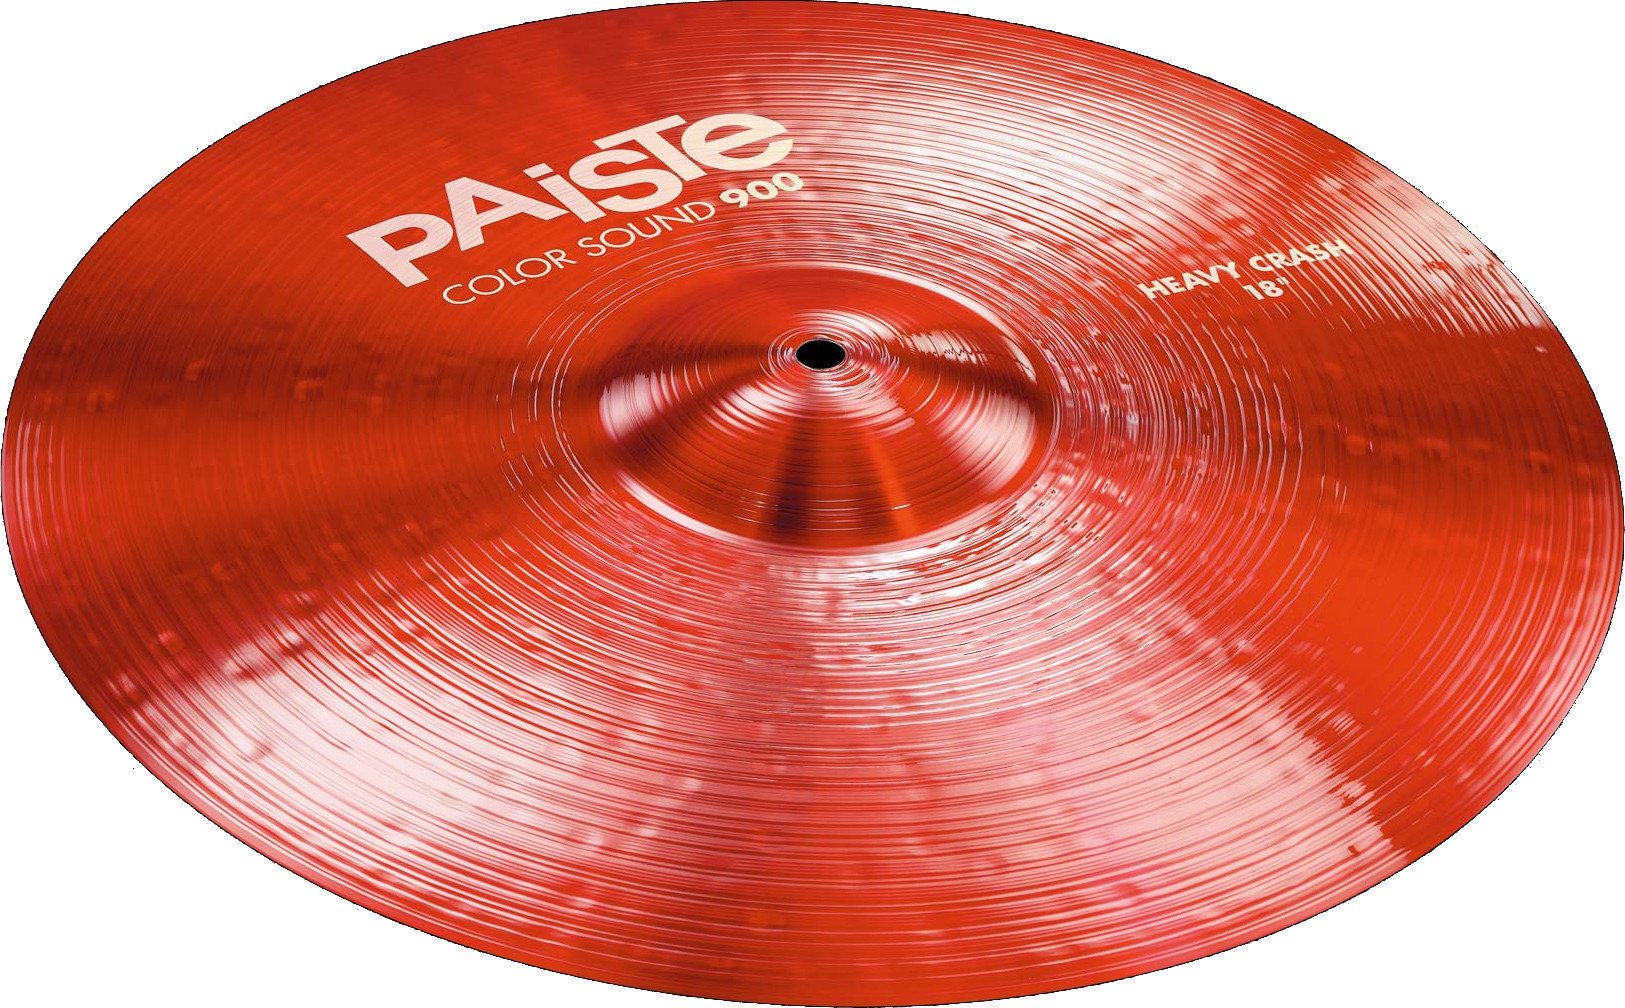 Crash Cymbal Paiste Color Sound 900  Heavy Crash Cymbal 20" Red